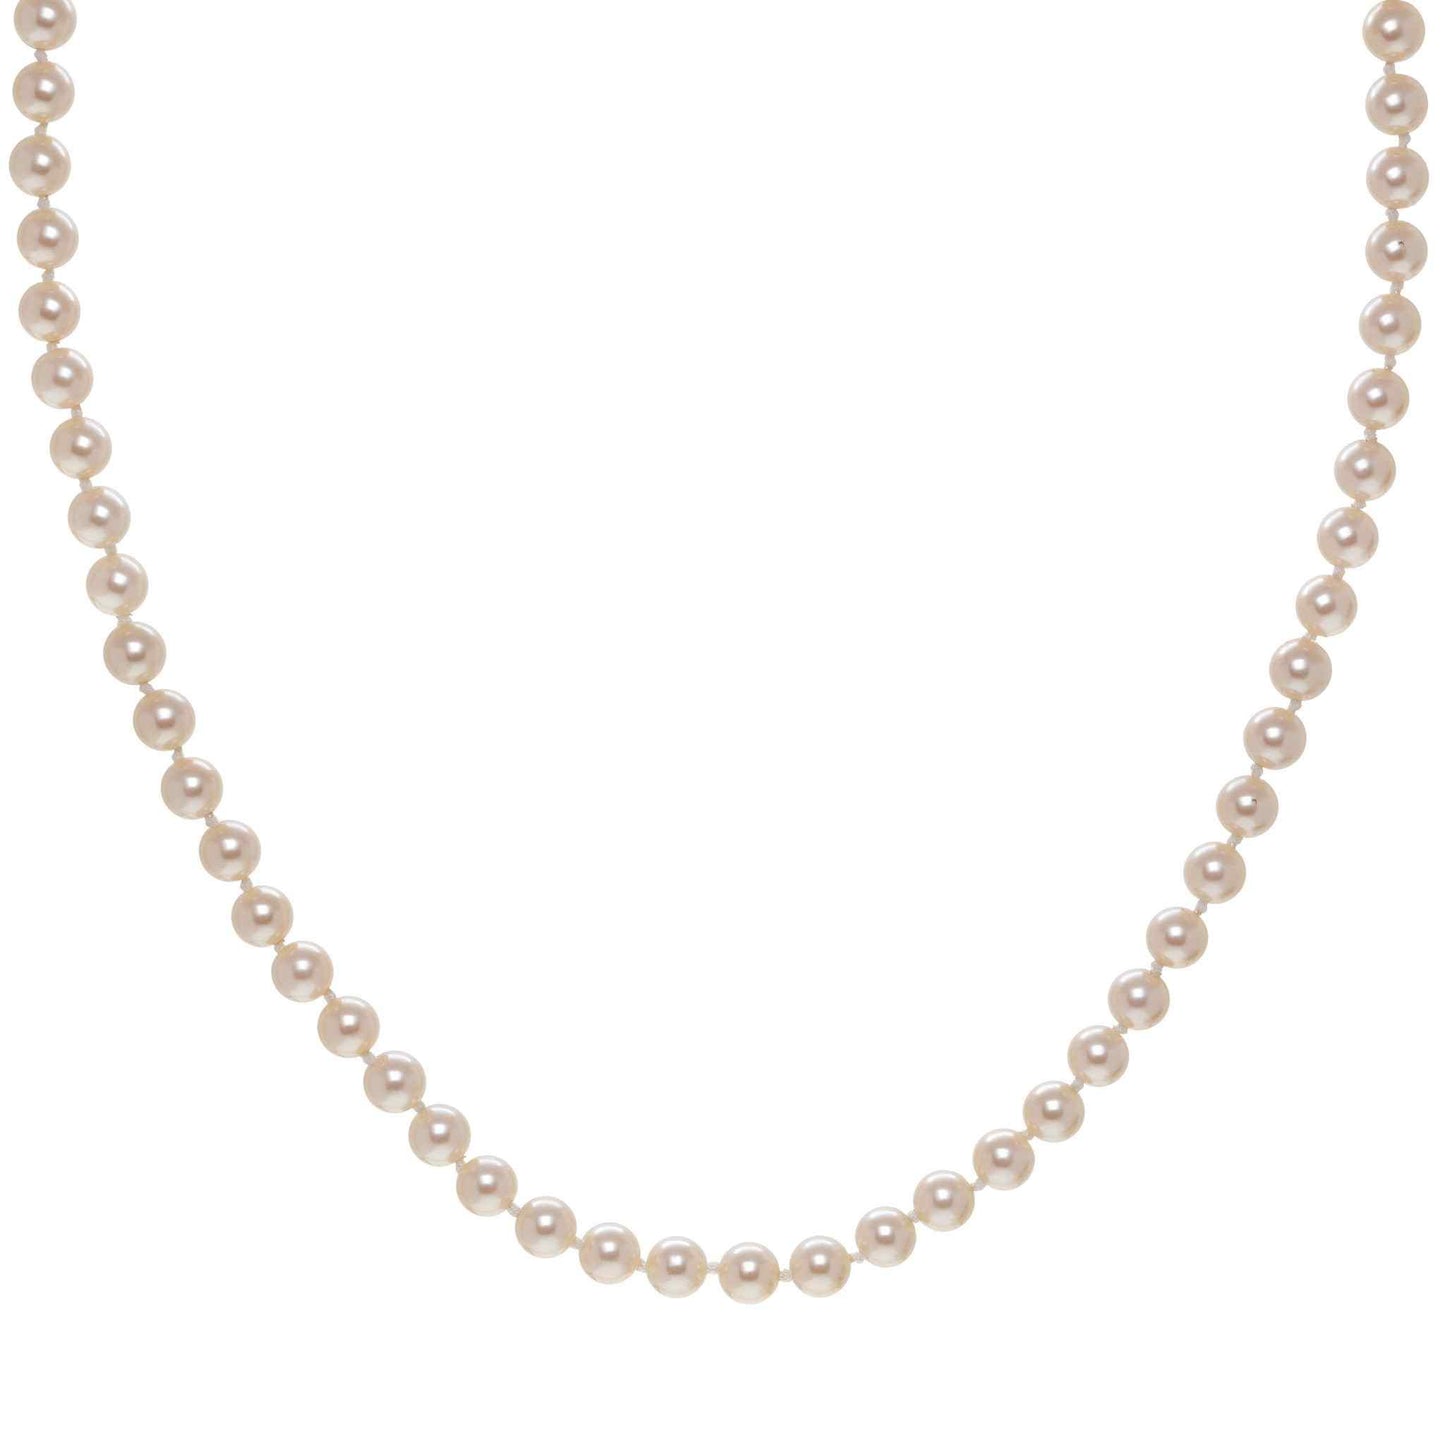 A knotted black glass pearl necklace displayed on a neutral white background.